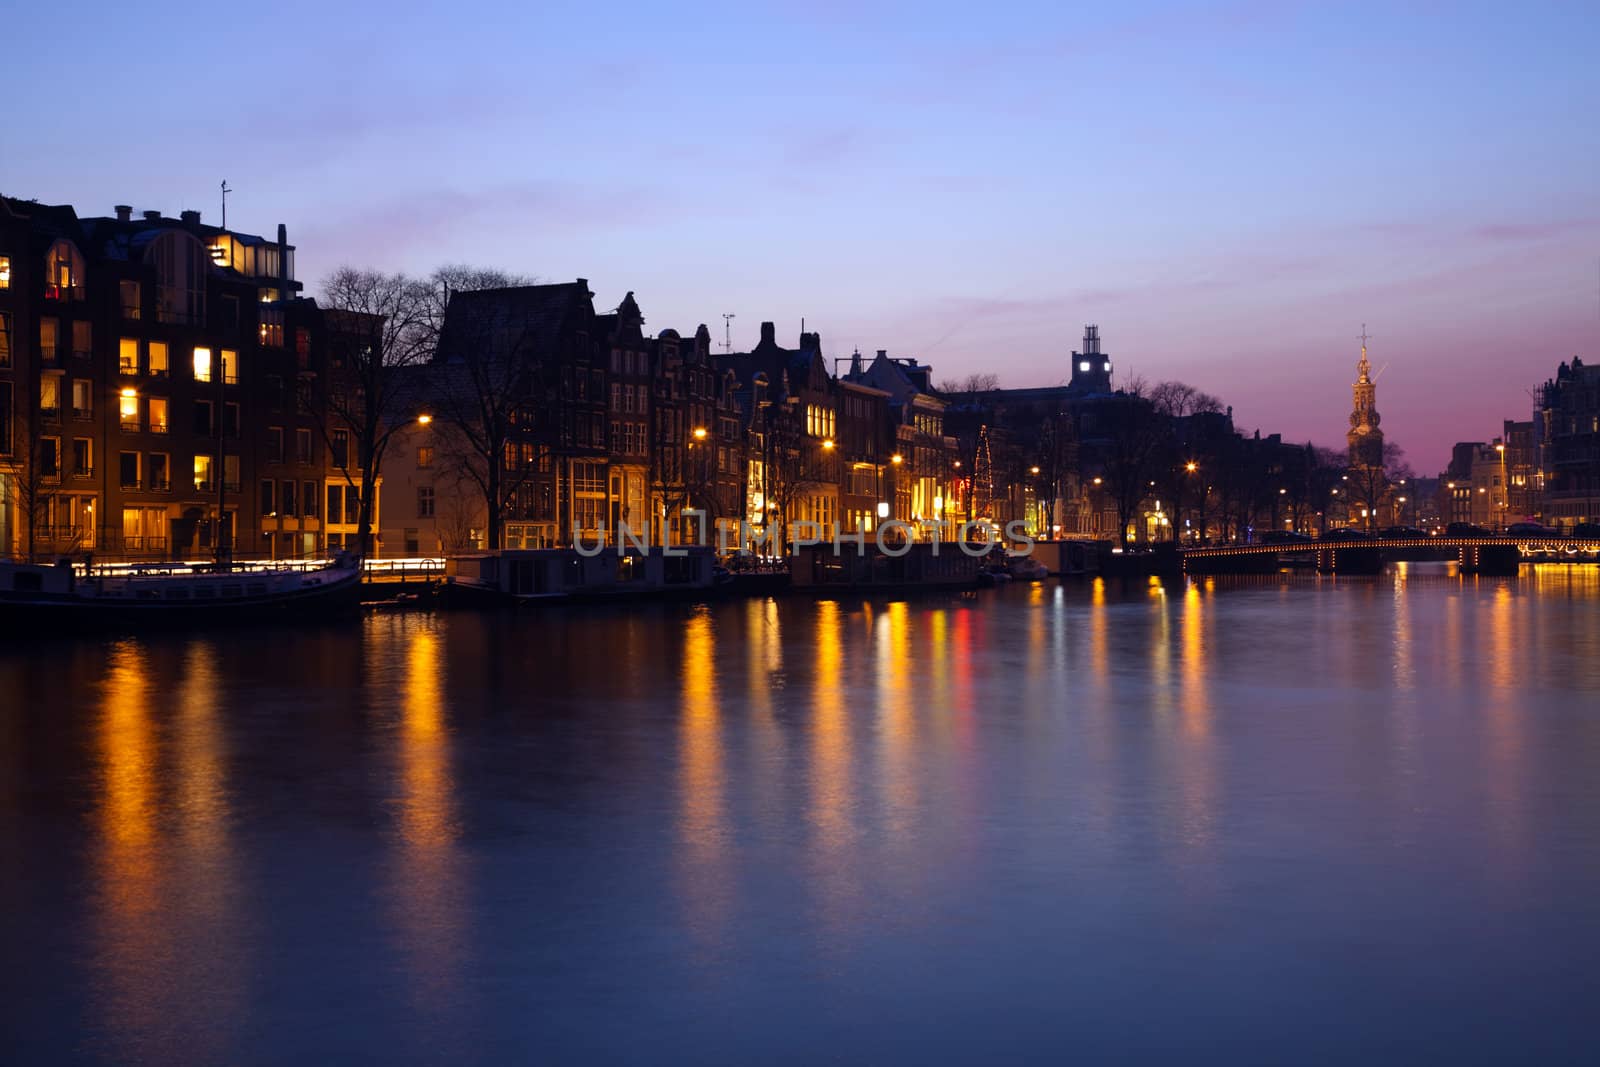 Evening in Amsterdam - seen during the winter.